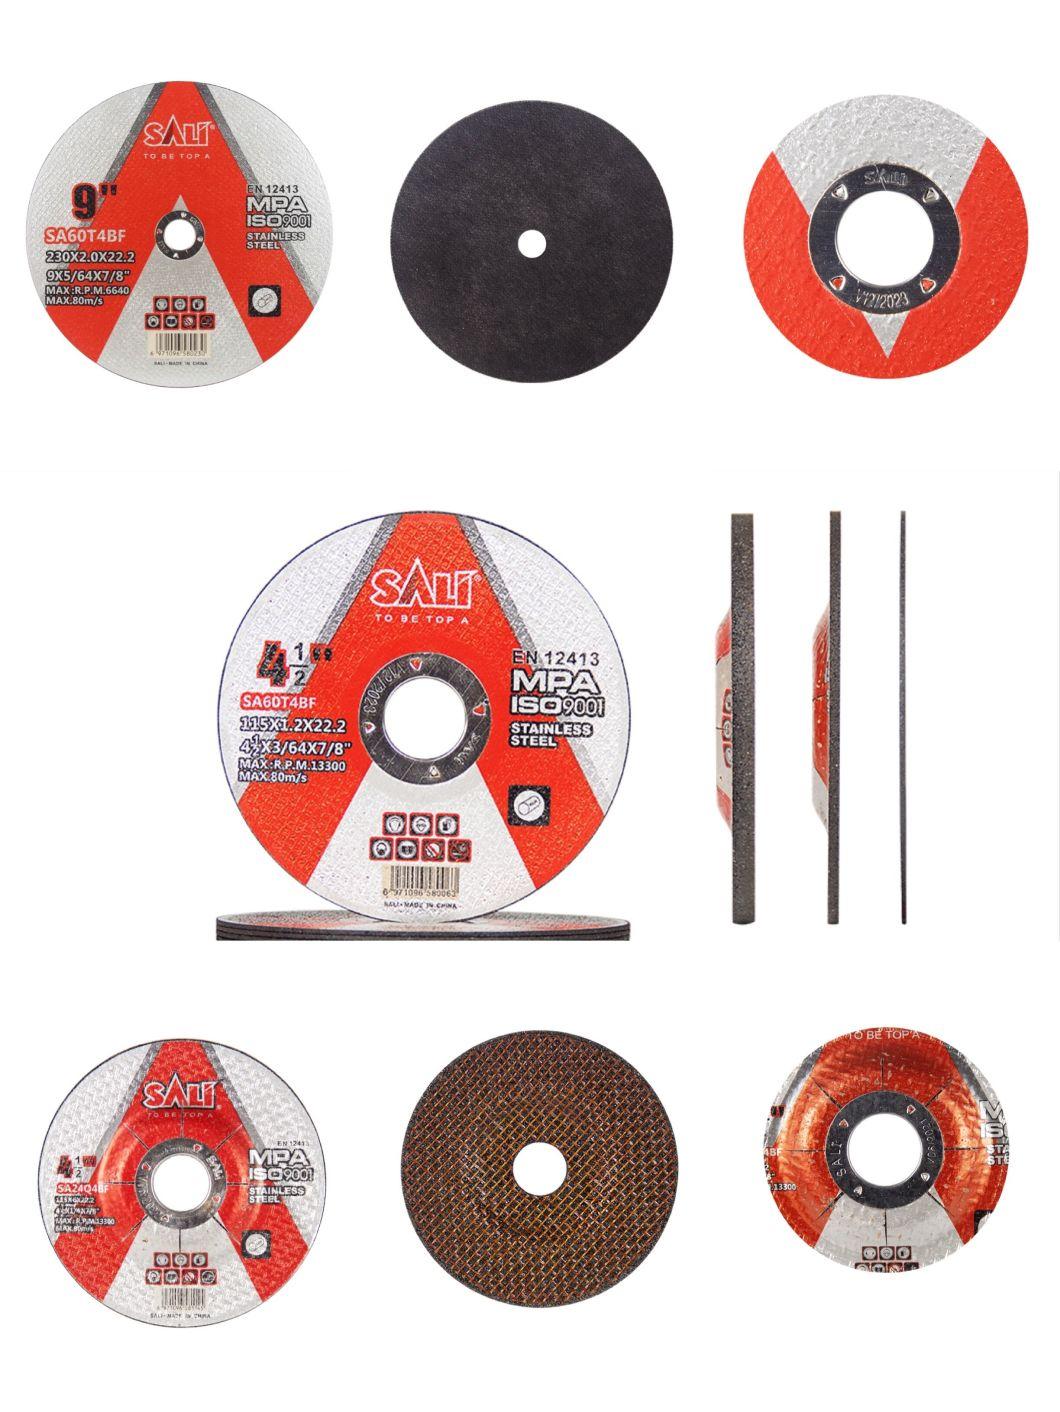 Sali 4.5inch 115*1.2*22mm Professonal Quality Stainless Steel Cutting Disc